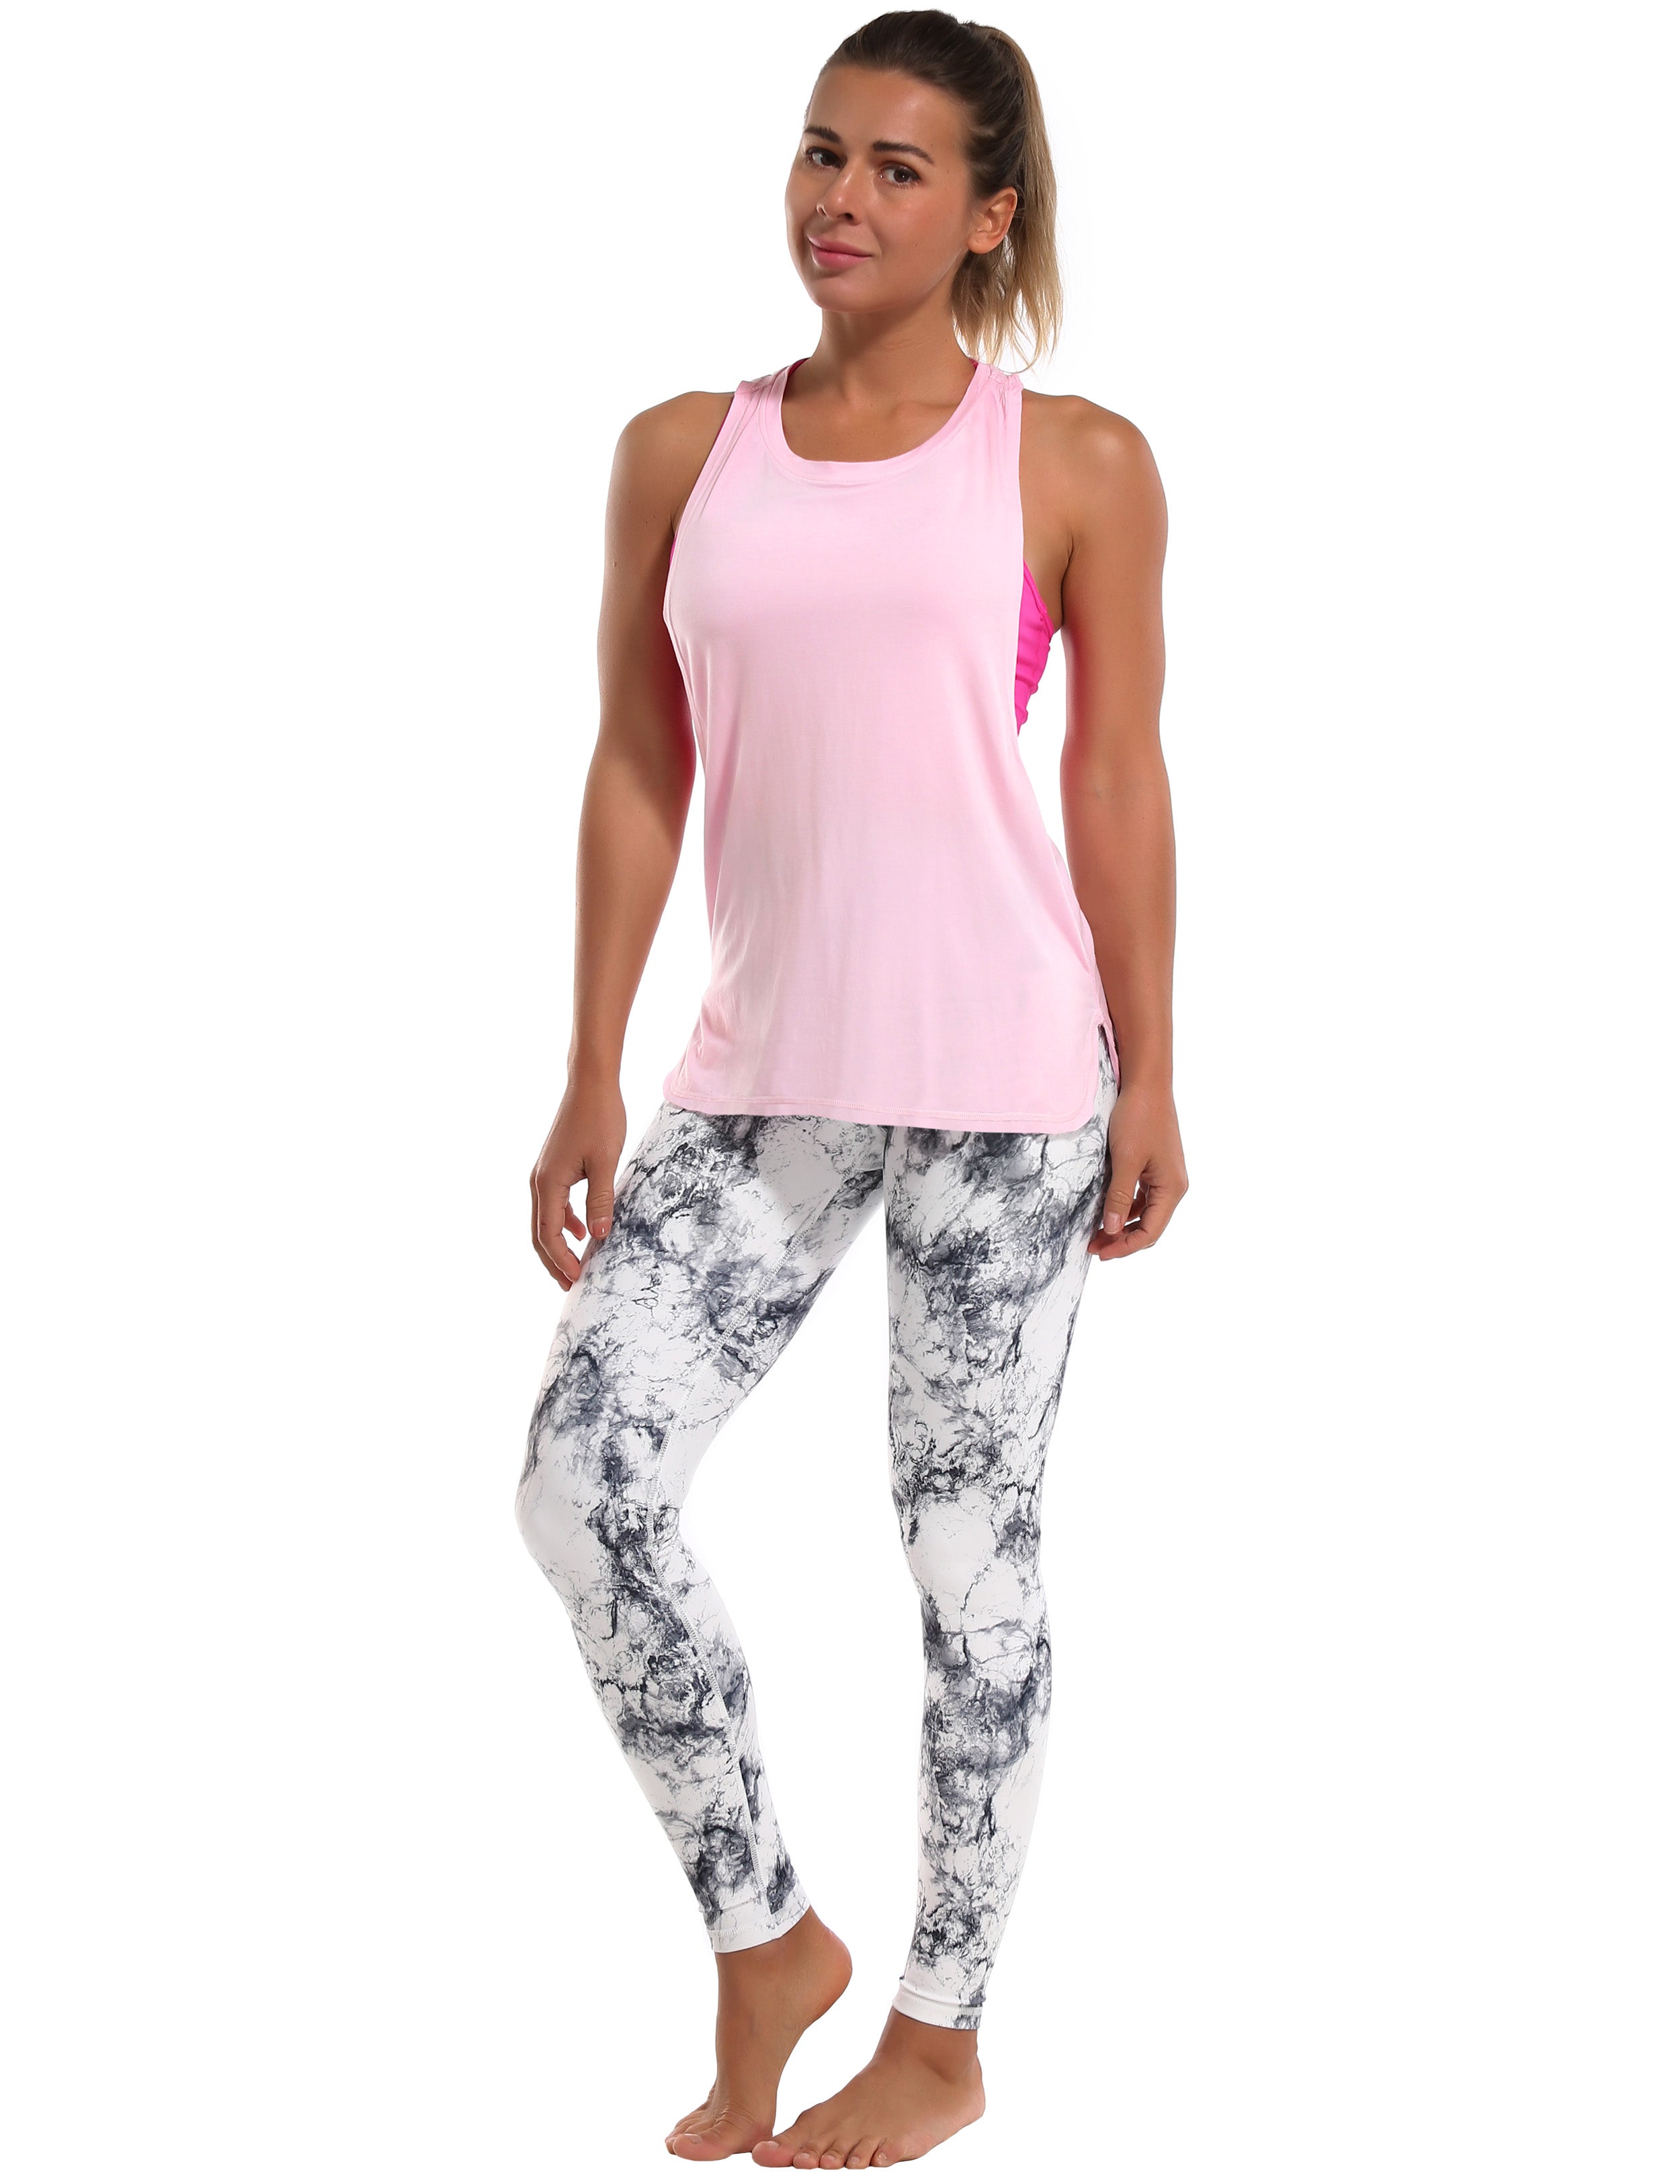 Low Cut Loose Fit Tank Top lightpink Designed for On the Move Loose fit 93%Modal/7%Spandex Four-way stretch Naturally breathable Super-Soft, Modal Fabric